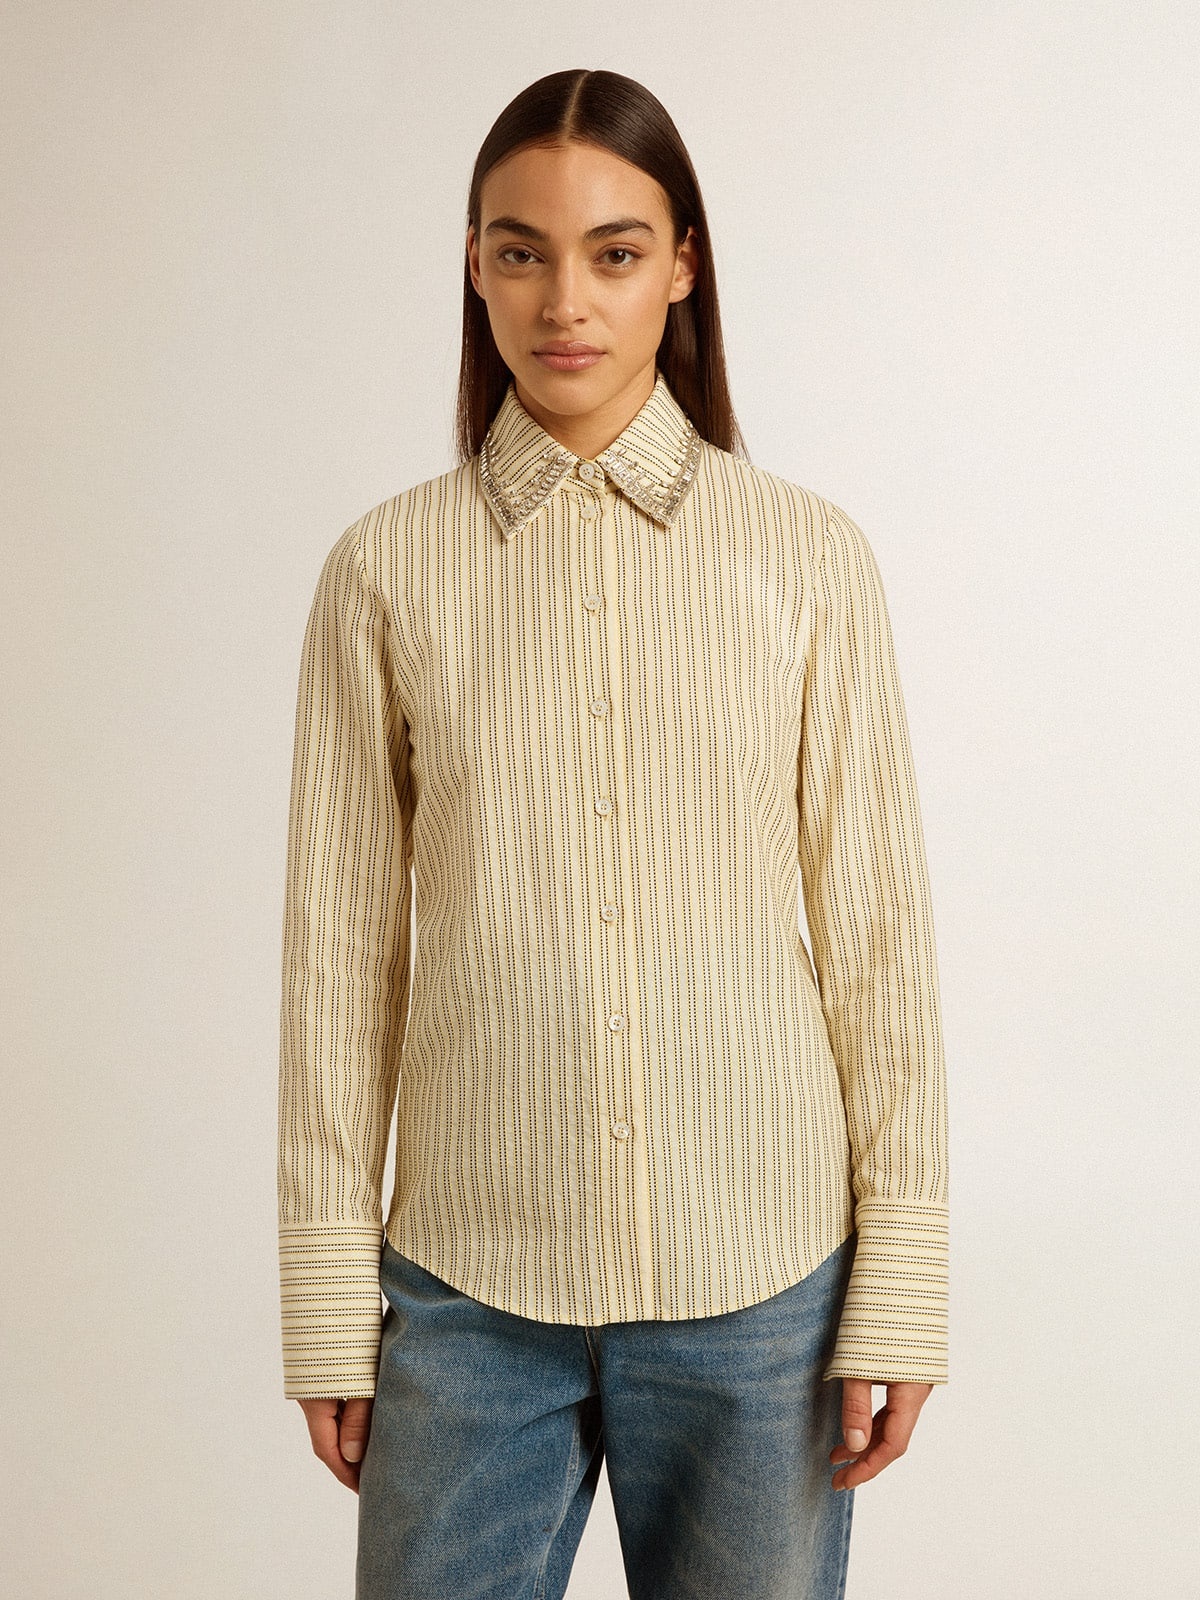 Ecru shirt with stripes and embroidered crystals - 2